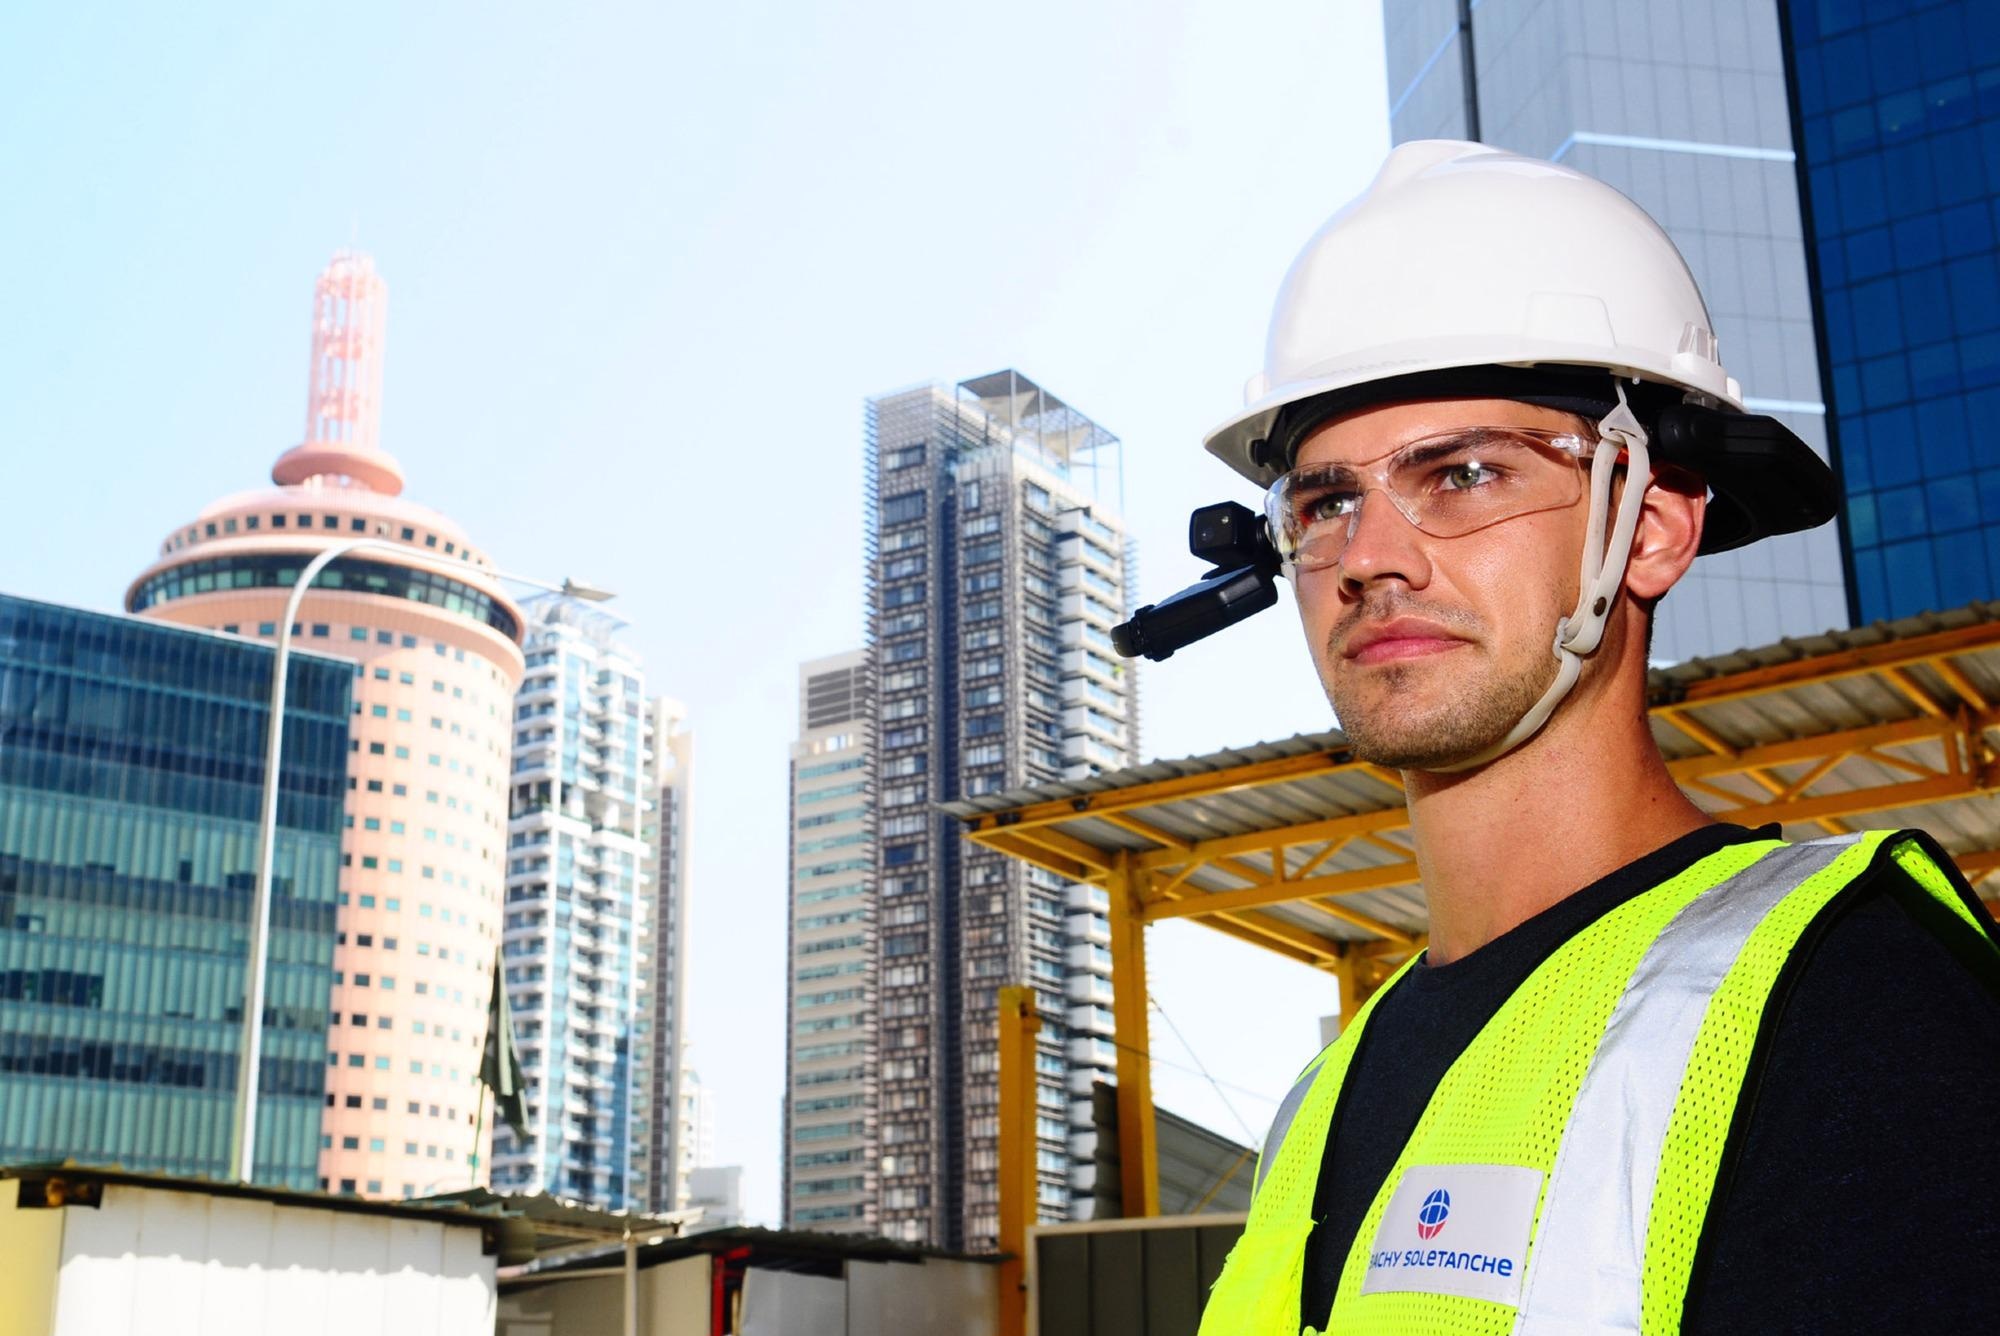 Soletanche Bachy Transforms Construction Site Safety Management with SimplyVideo